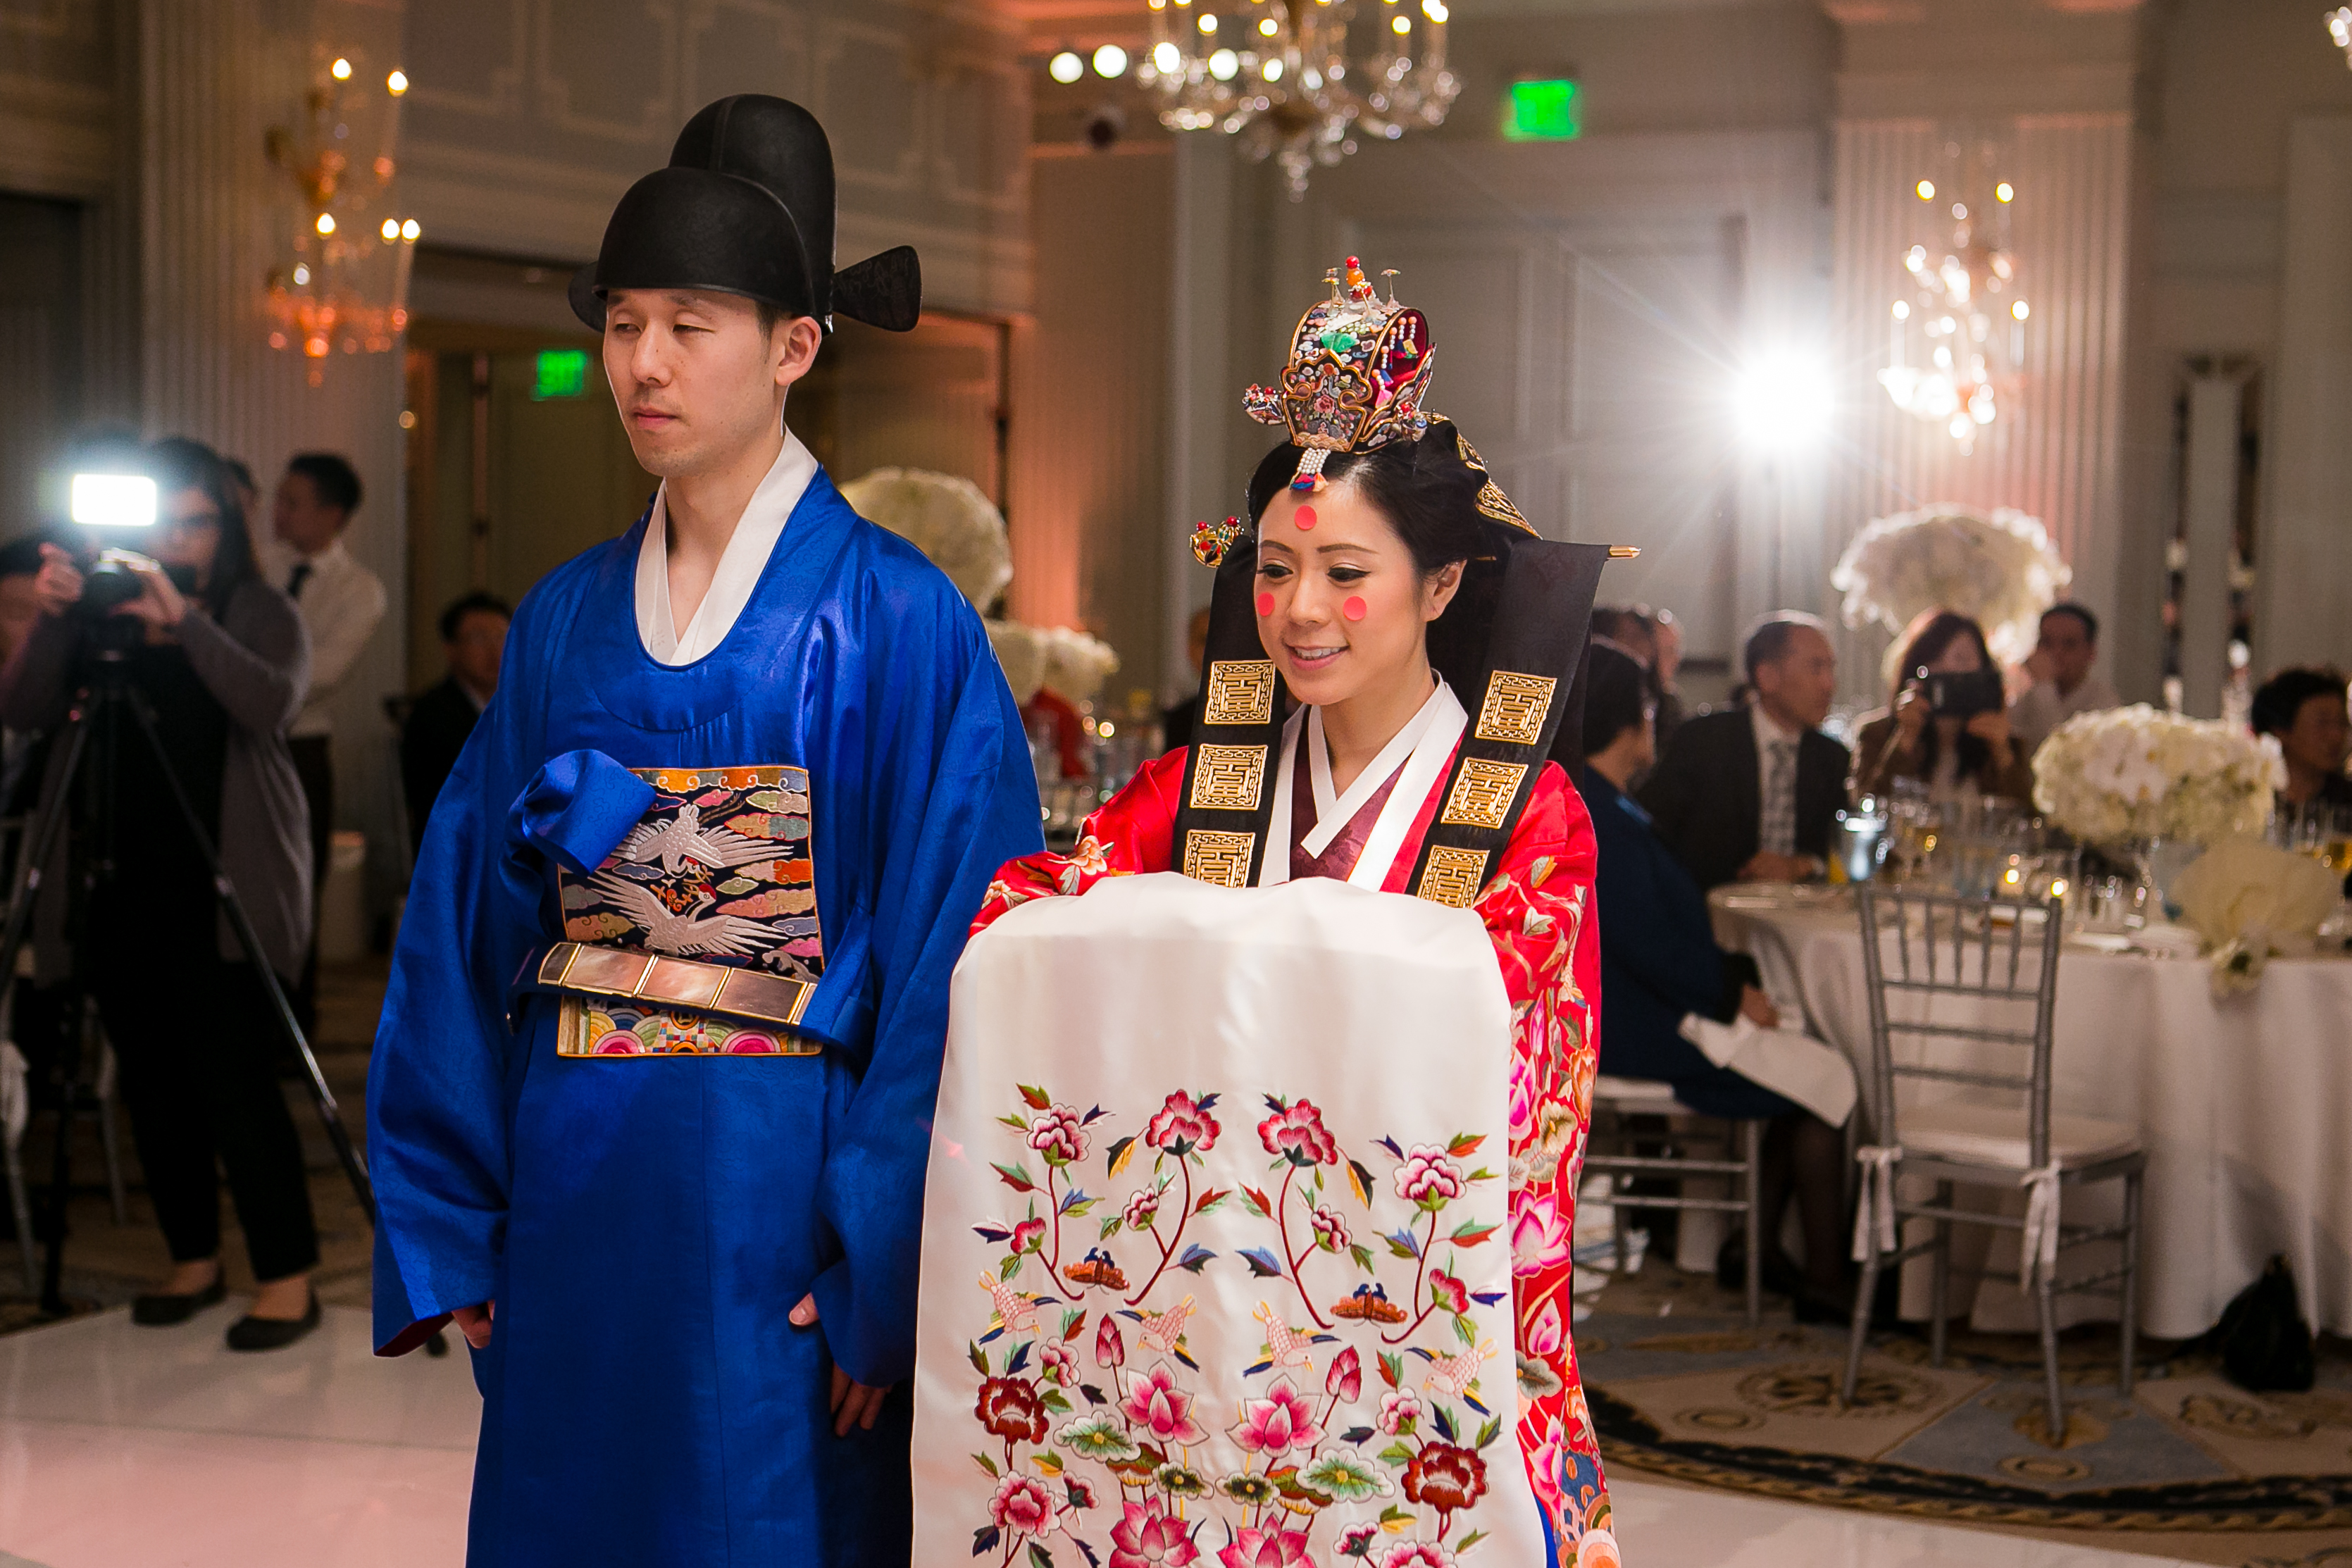  Korean  Wedding  Traditions What You Need to Know